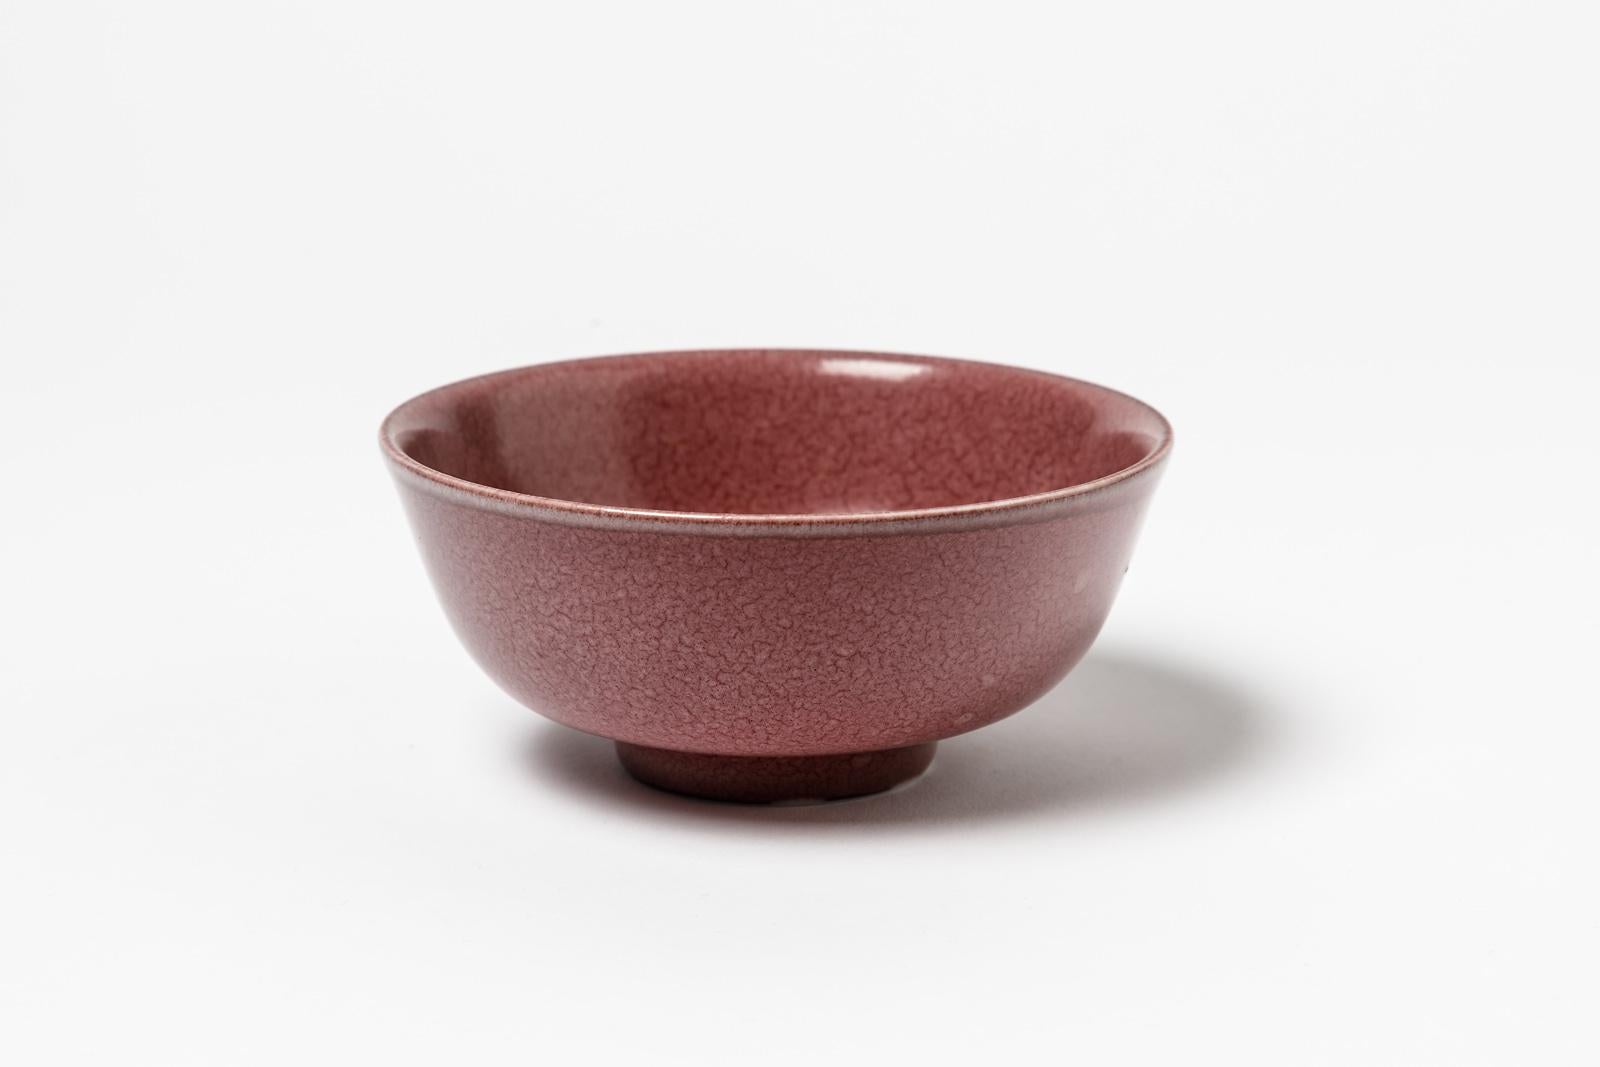 Pink or Red Glazed Porcelain Ceramic Bowl or Cup by Marc Uzan, circa 2010 In Excellent Condition For Sale In Neuilly-en- sancerre, FR